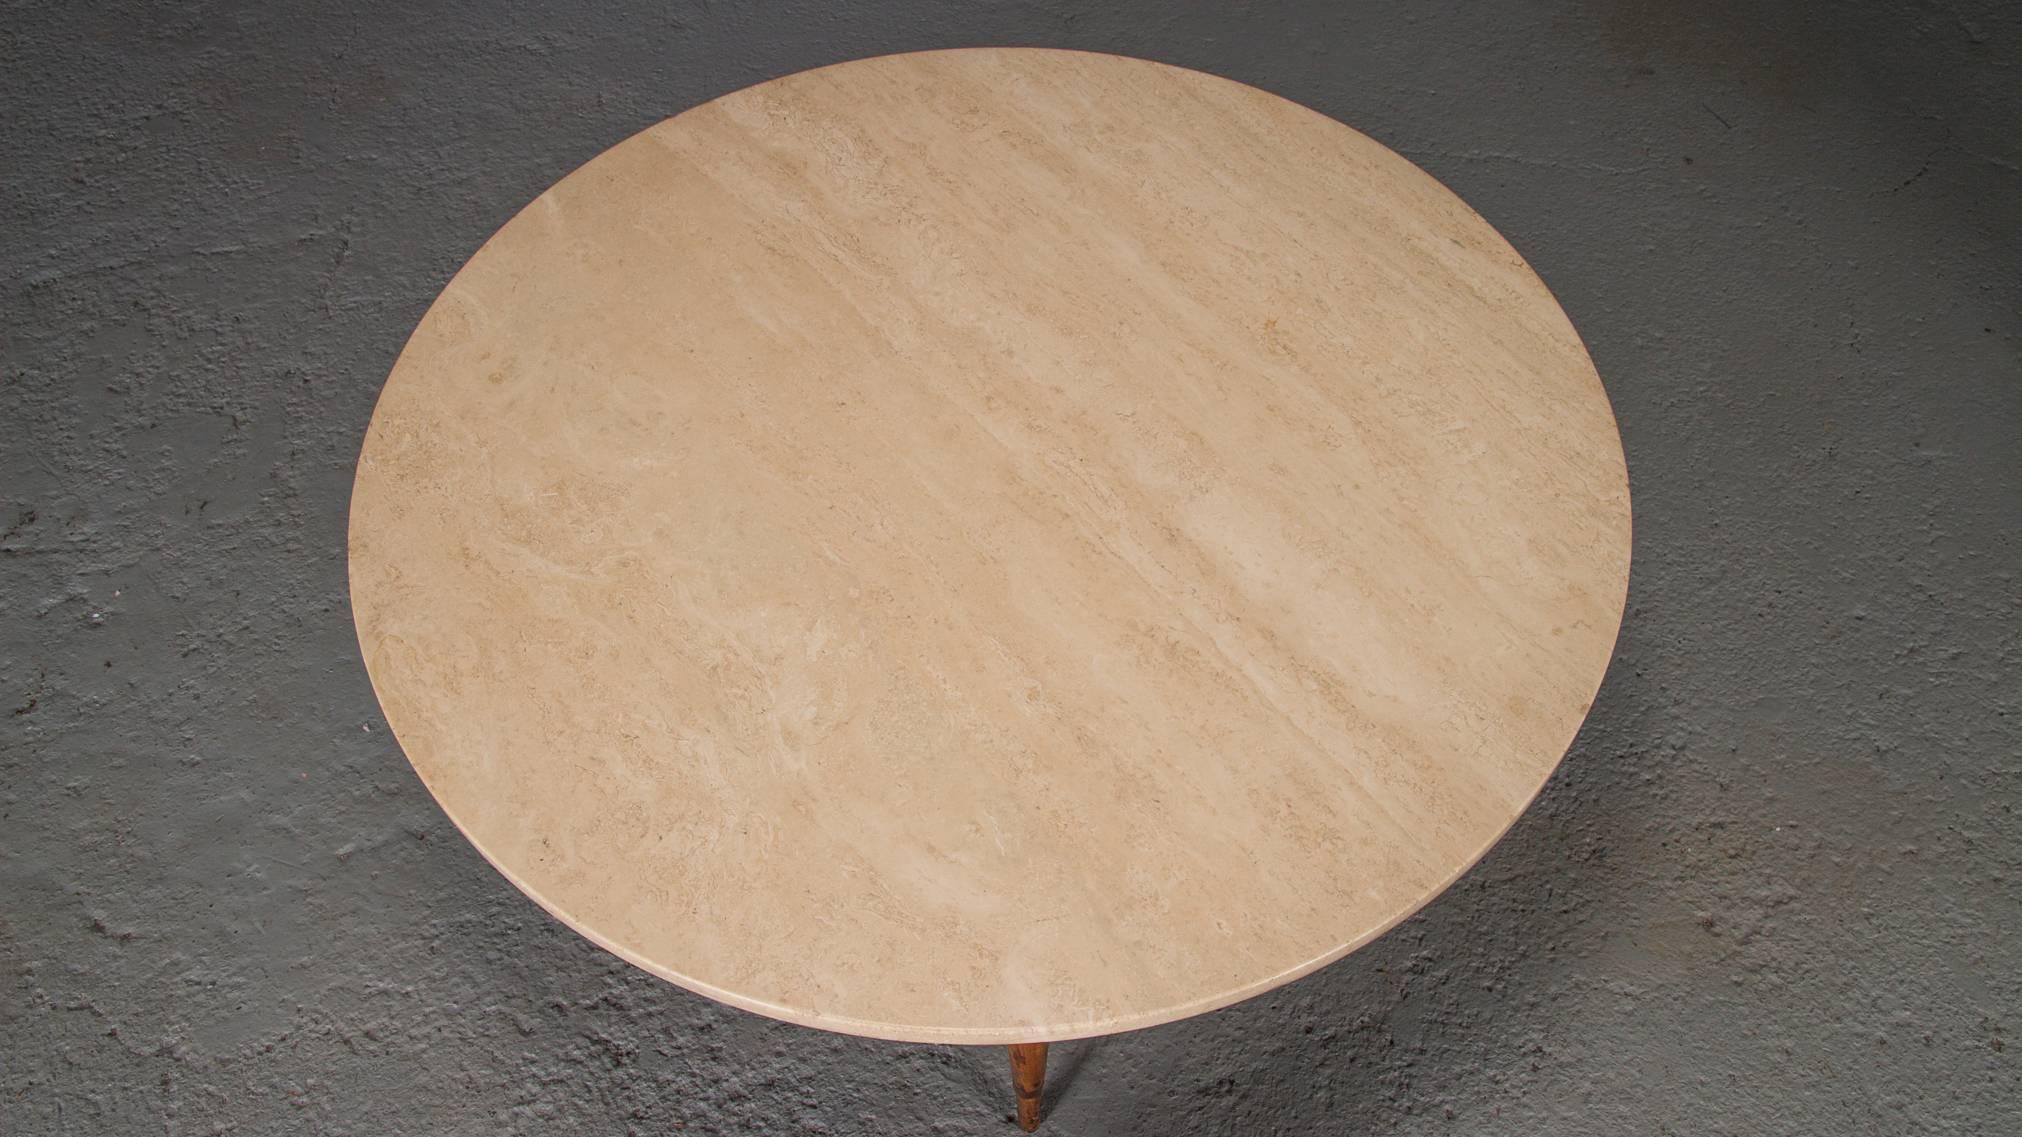 Made of travertine, walnut, and brass, this Mid-Century Modern coffee or cocktail table was designed by Paul McCobb for the Conoisseur collection.